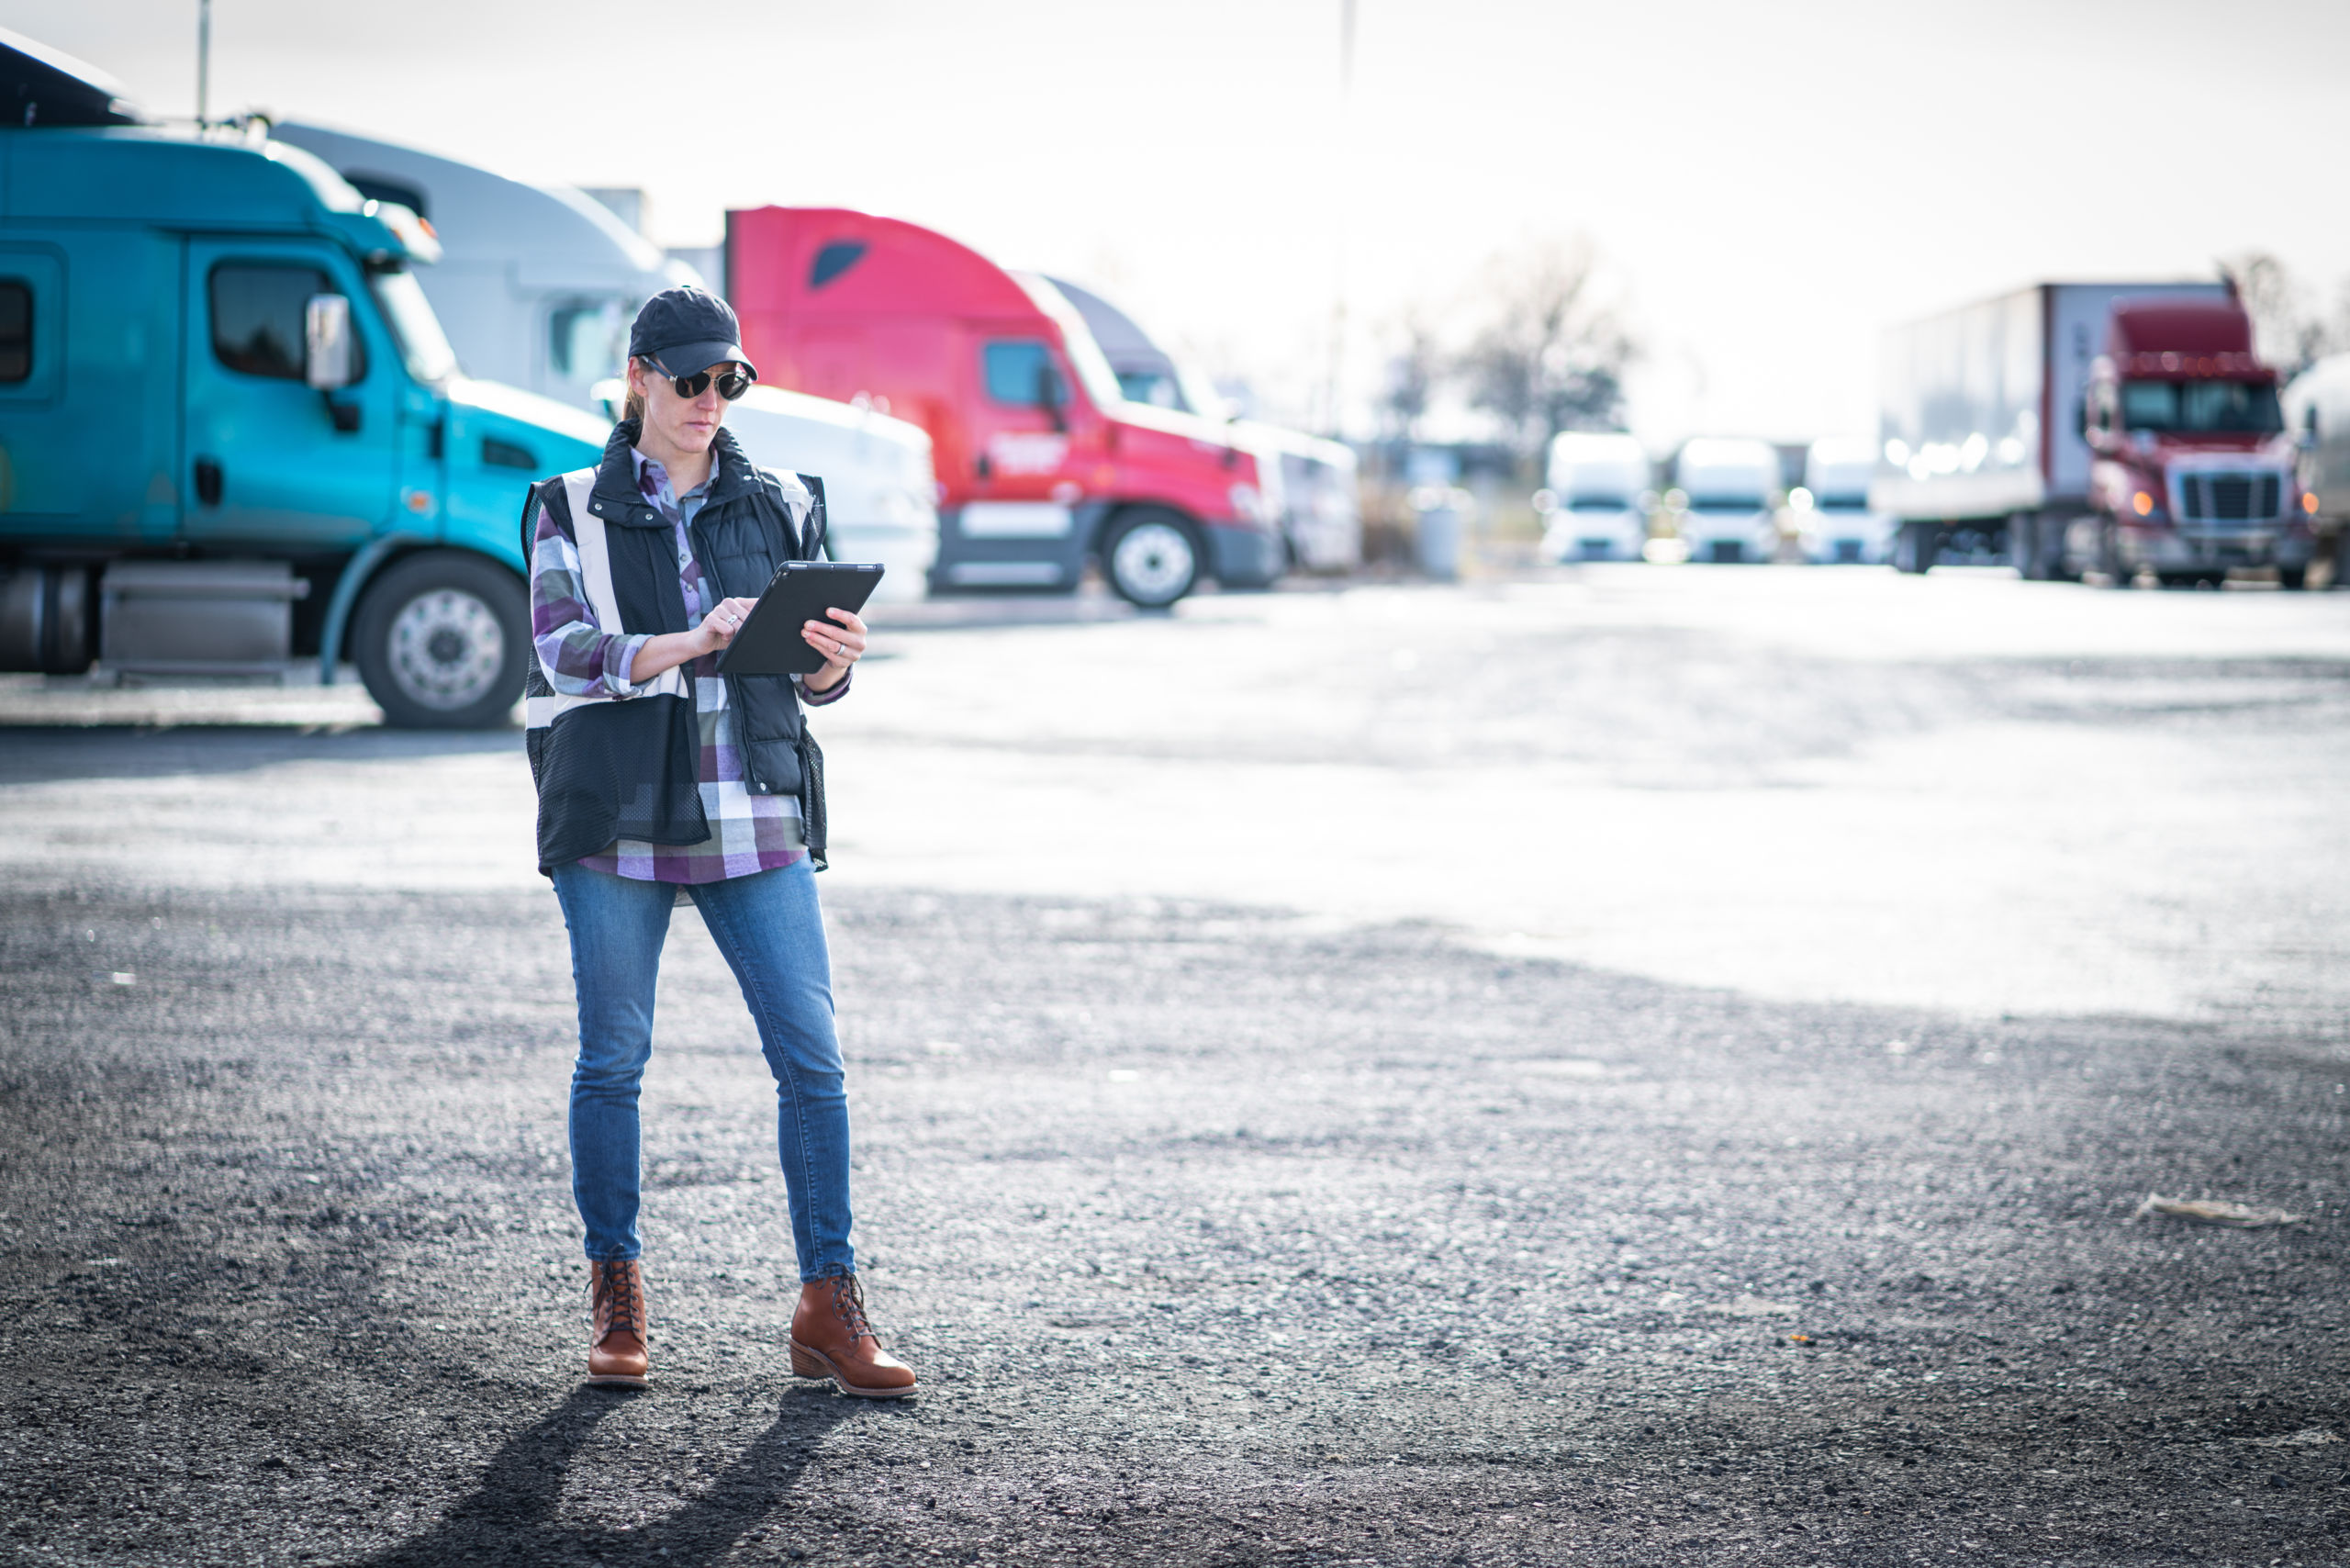 Trucking is a viable career path for women